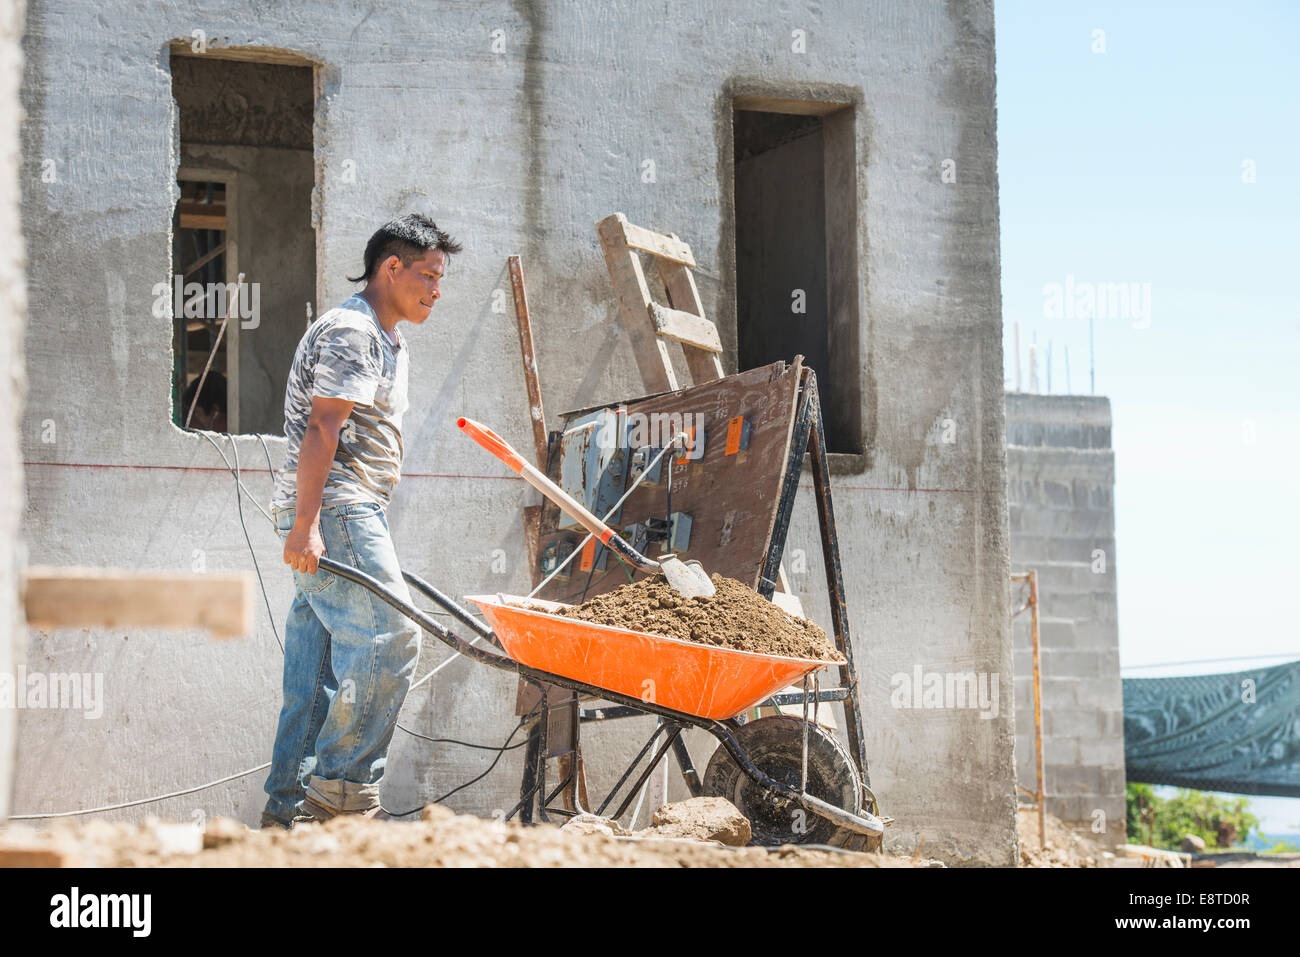 Hispanic construction worker pushing wheelbarrow at construction site Banque D'Images